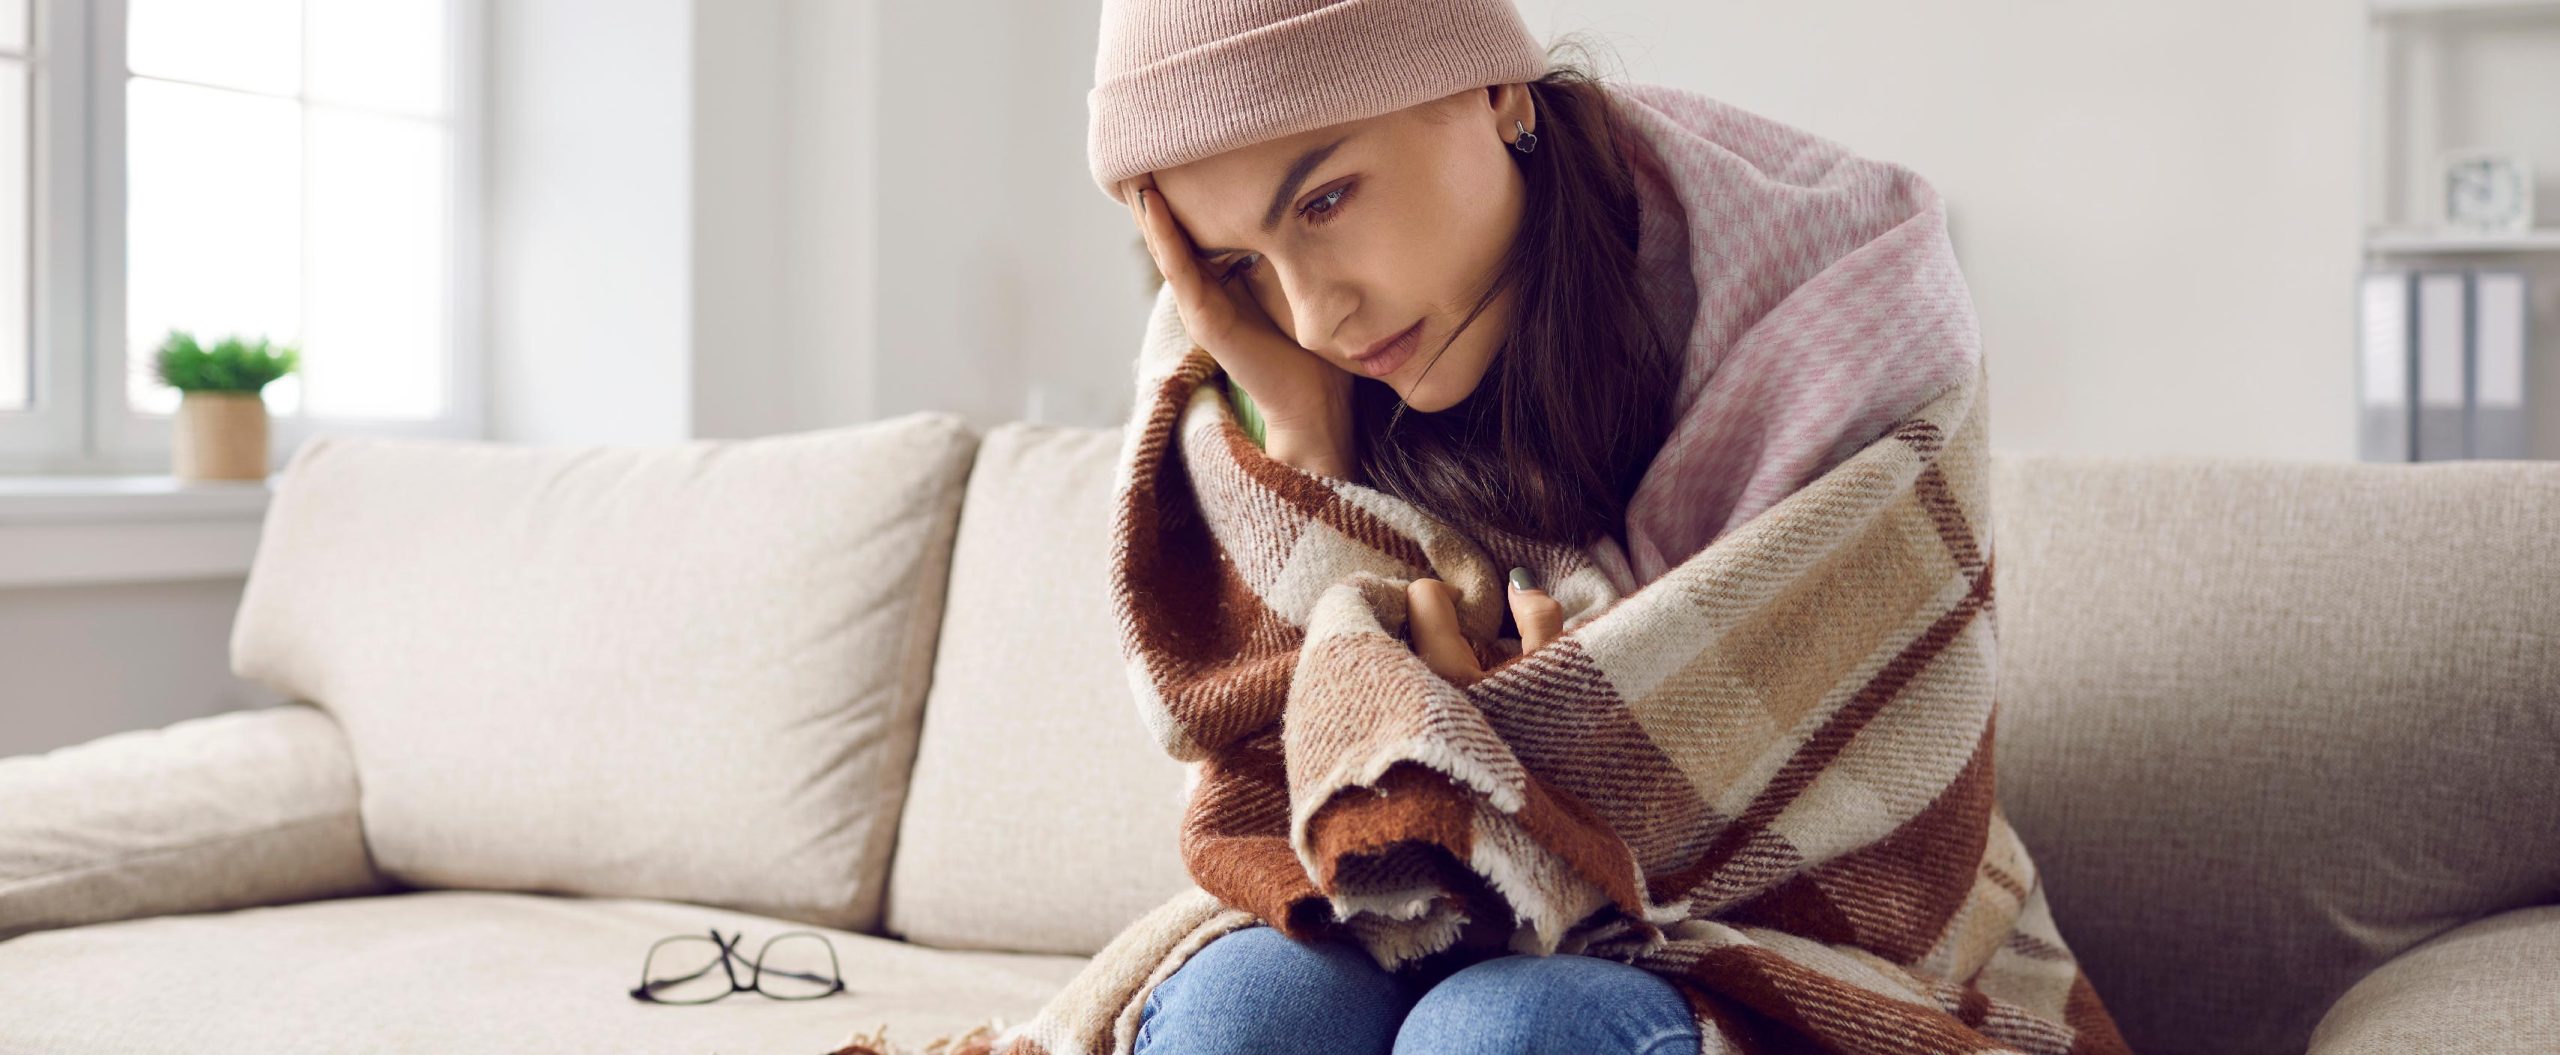 woman wearing blanket on her couch looking upset furnace not keeping up with thermostat